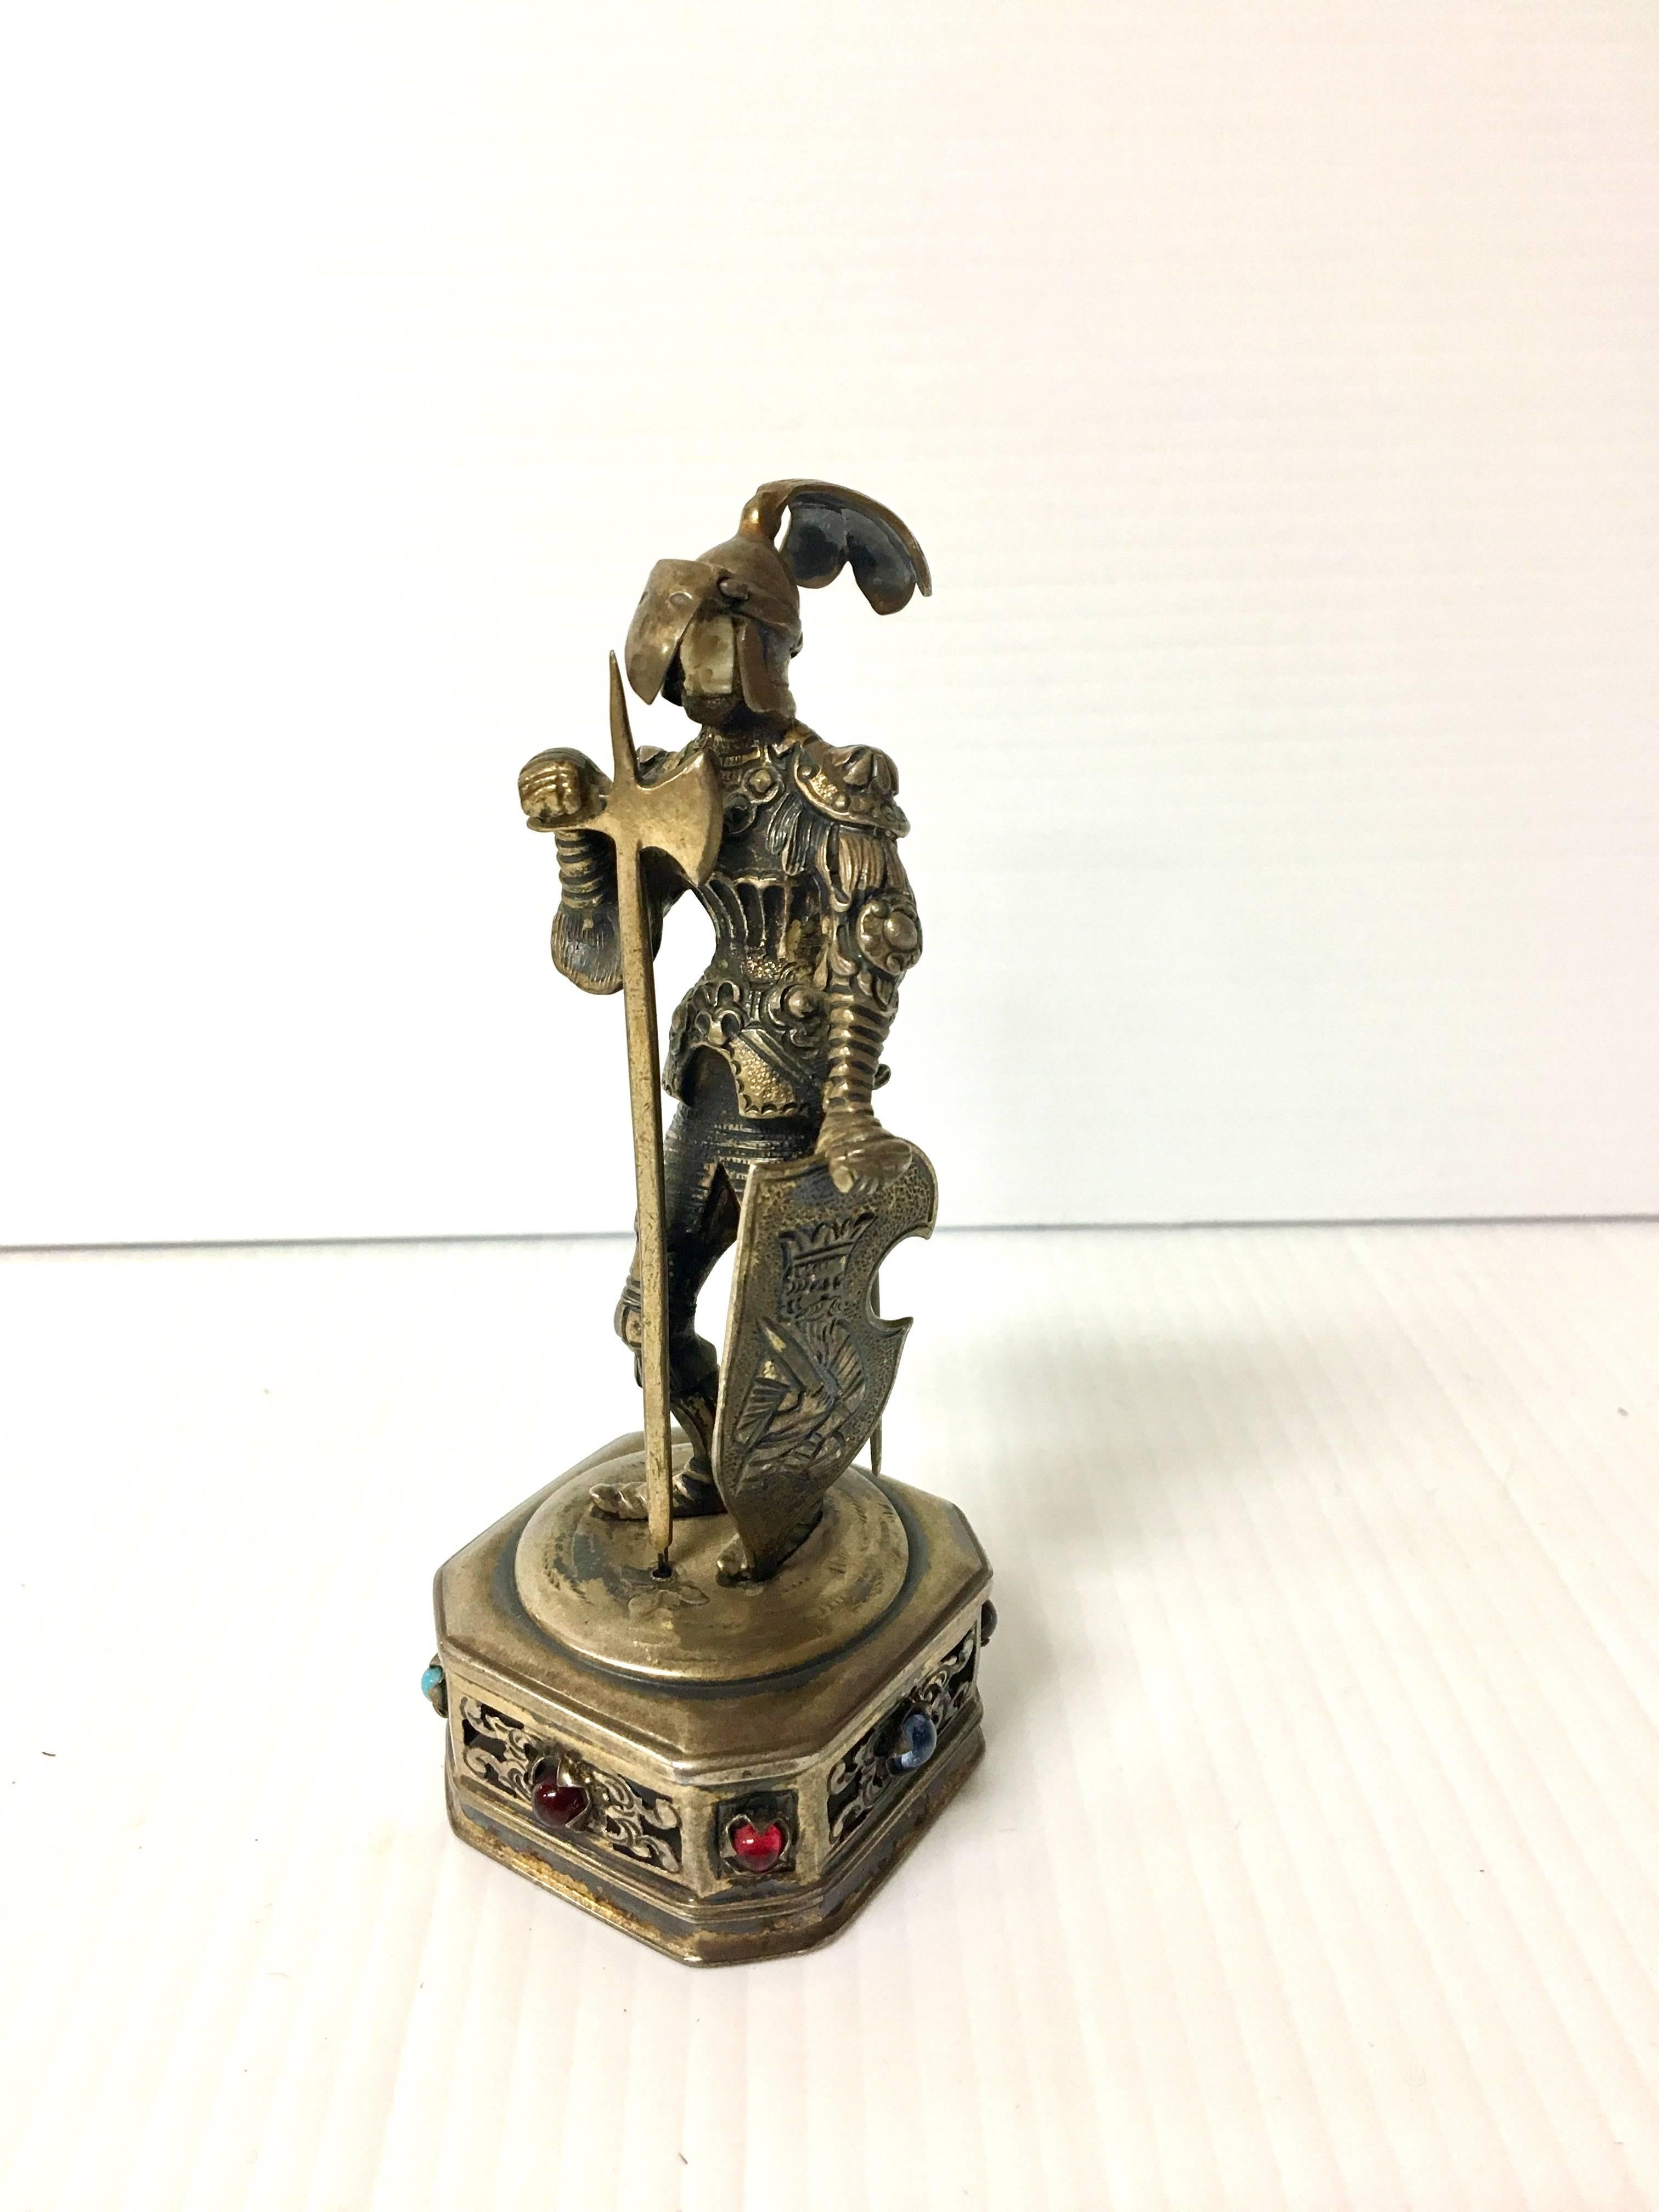 Rare and unique small jewel encrusted sterling silver knight statue with movable face guard. The face of the statue appears to be bone. The piece is 4.5" tall and stamped "925 Sterling Germany". Nice patination and detail.